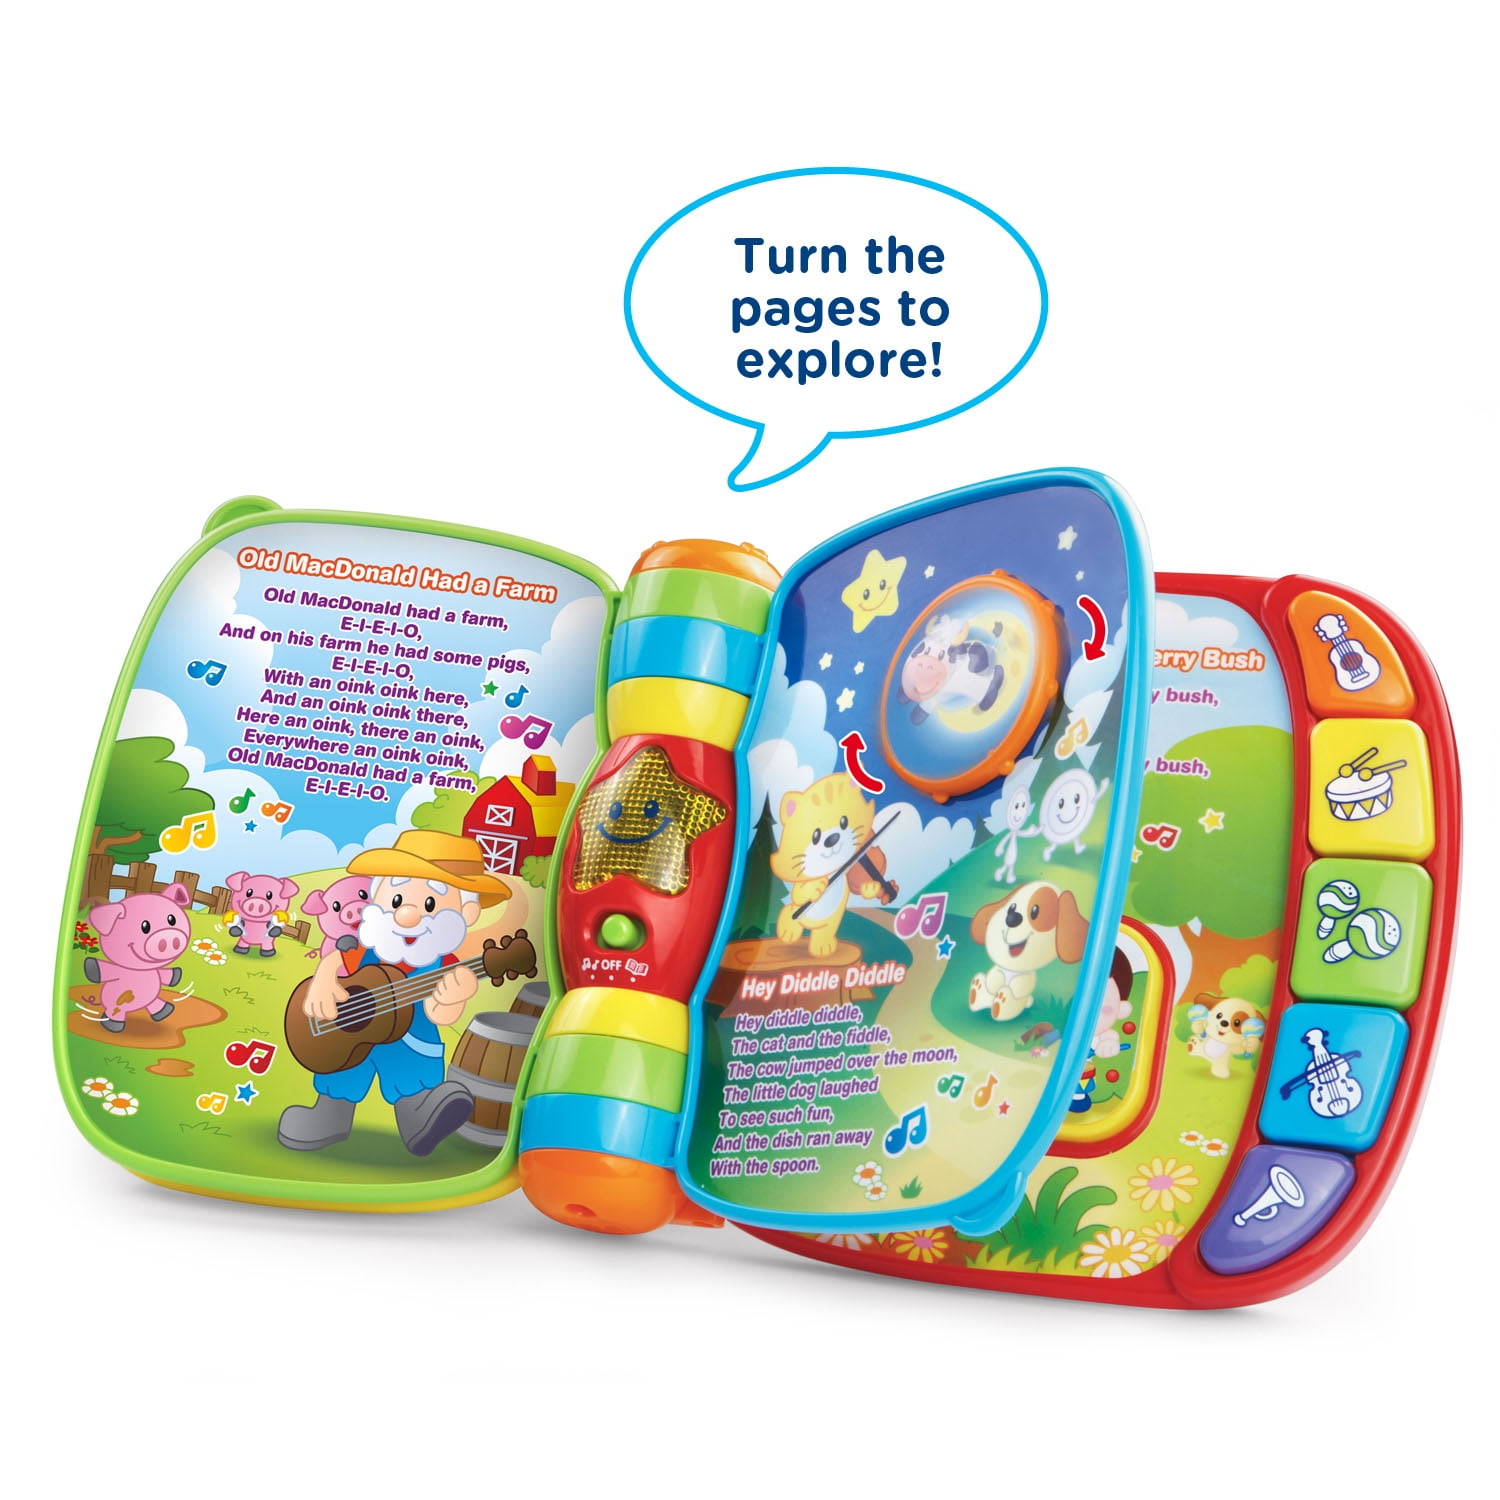 Vtech MUSICAL RHYMES BOOK Baby/Toddler Early Reading Educational Story 3m BN 